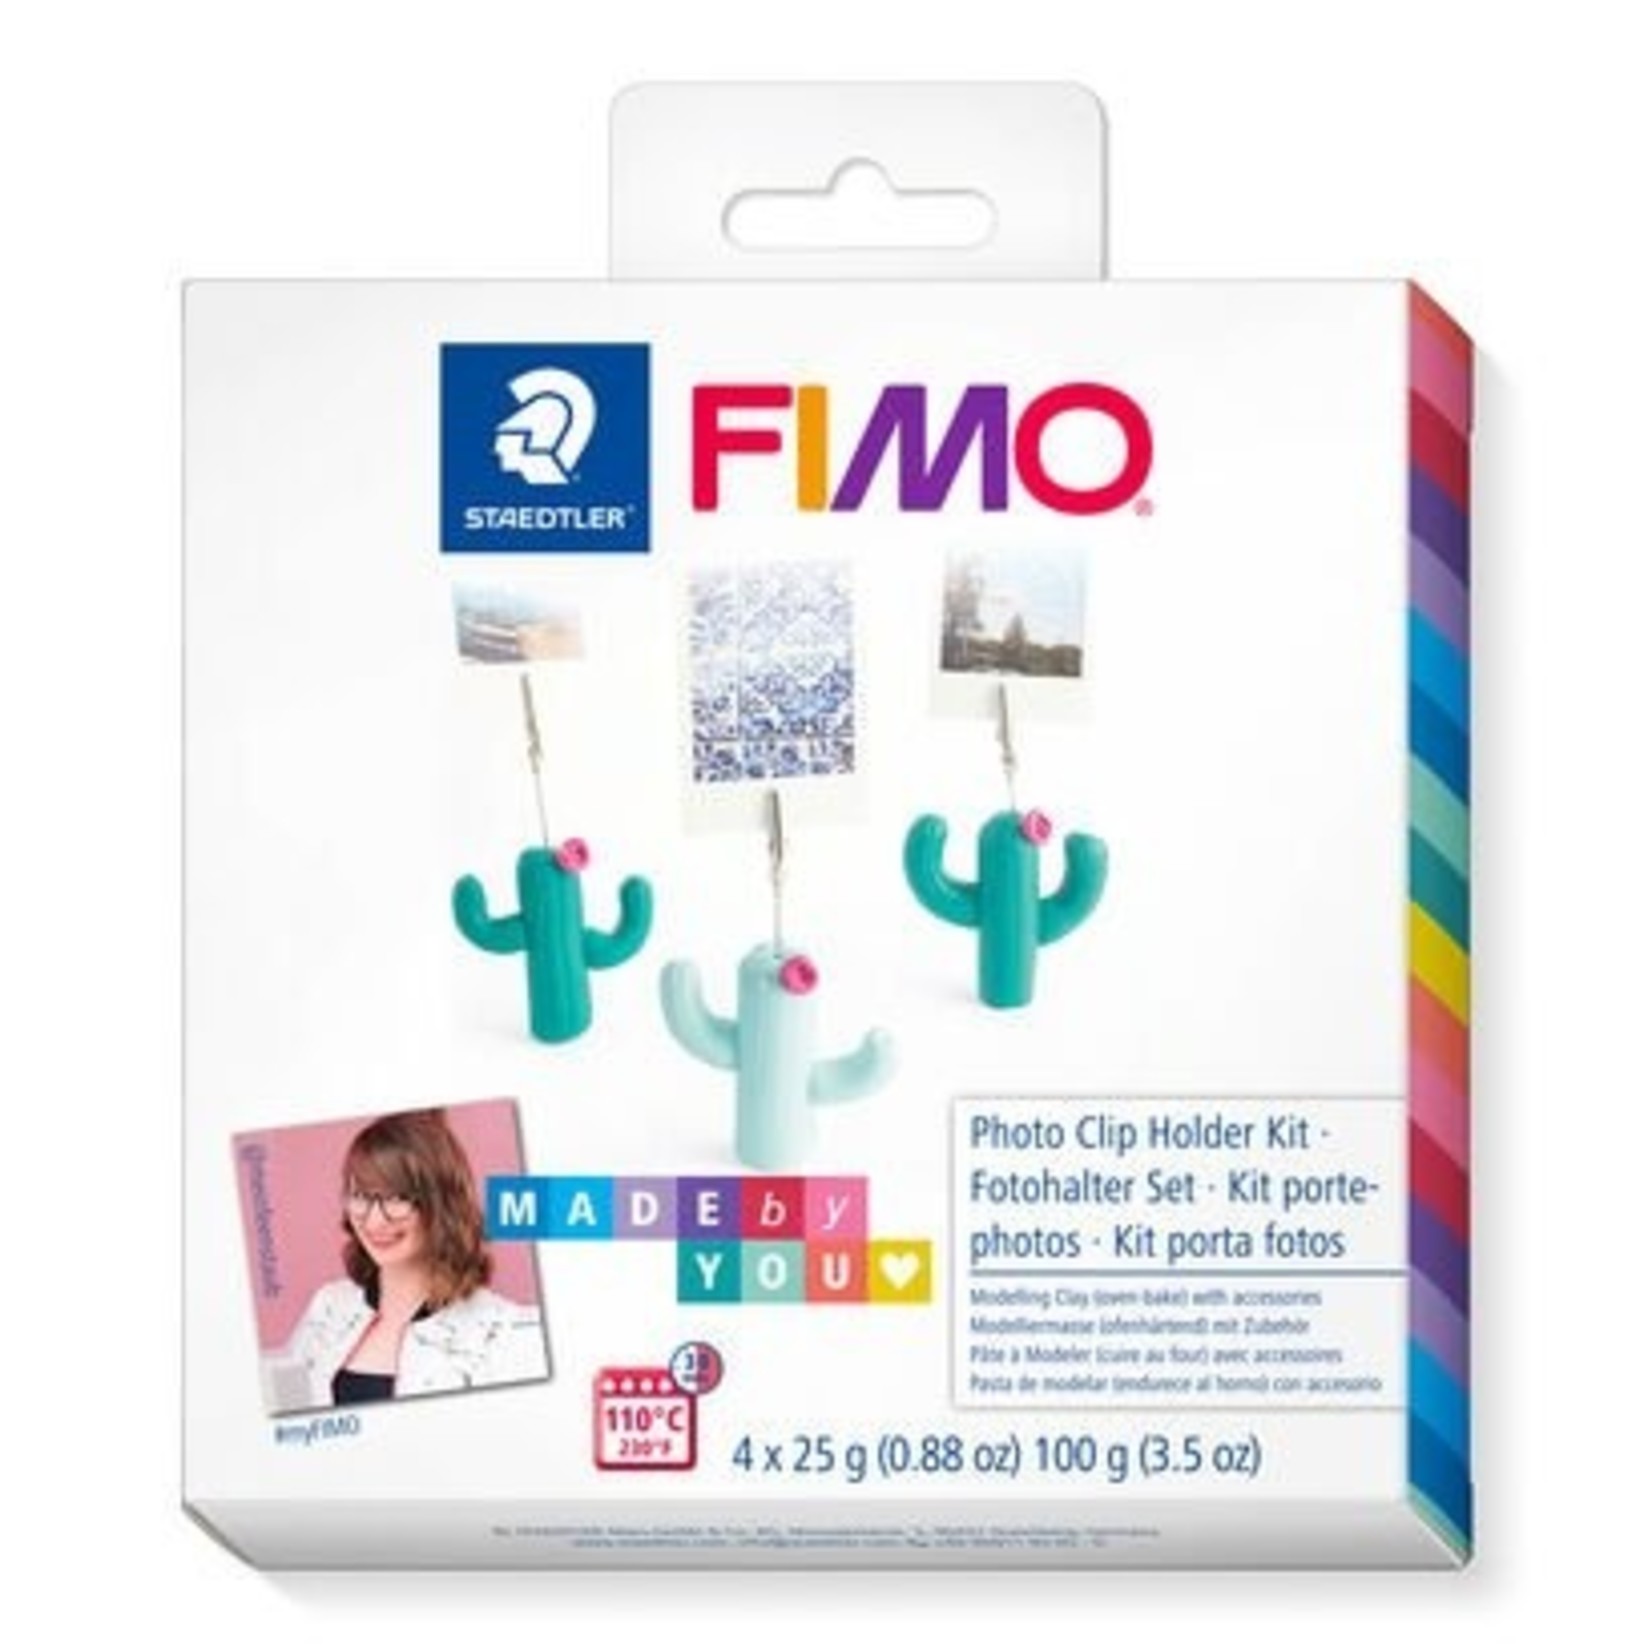 FIMO MADE BY YOU PHOTO CLIP HOLDER